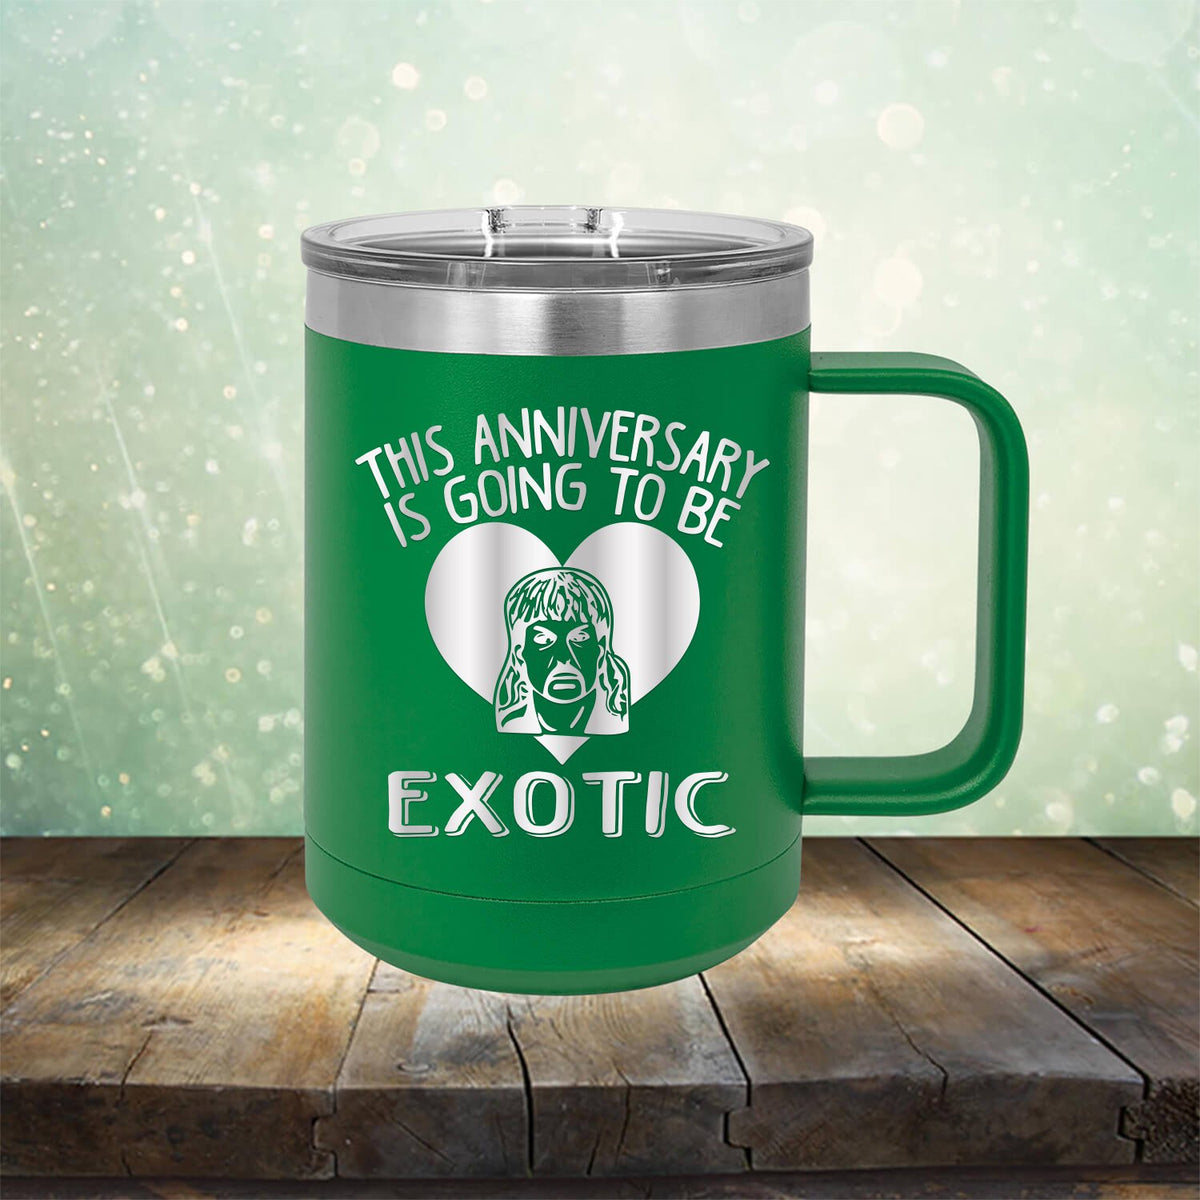 This Anniversary is Going To Be Exotic